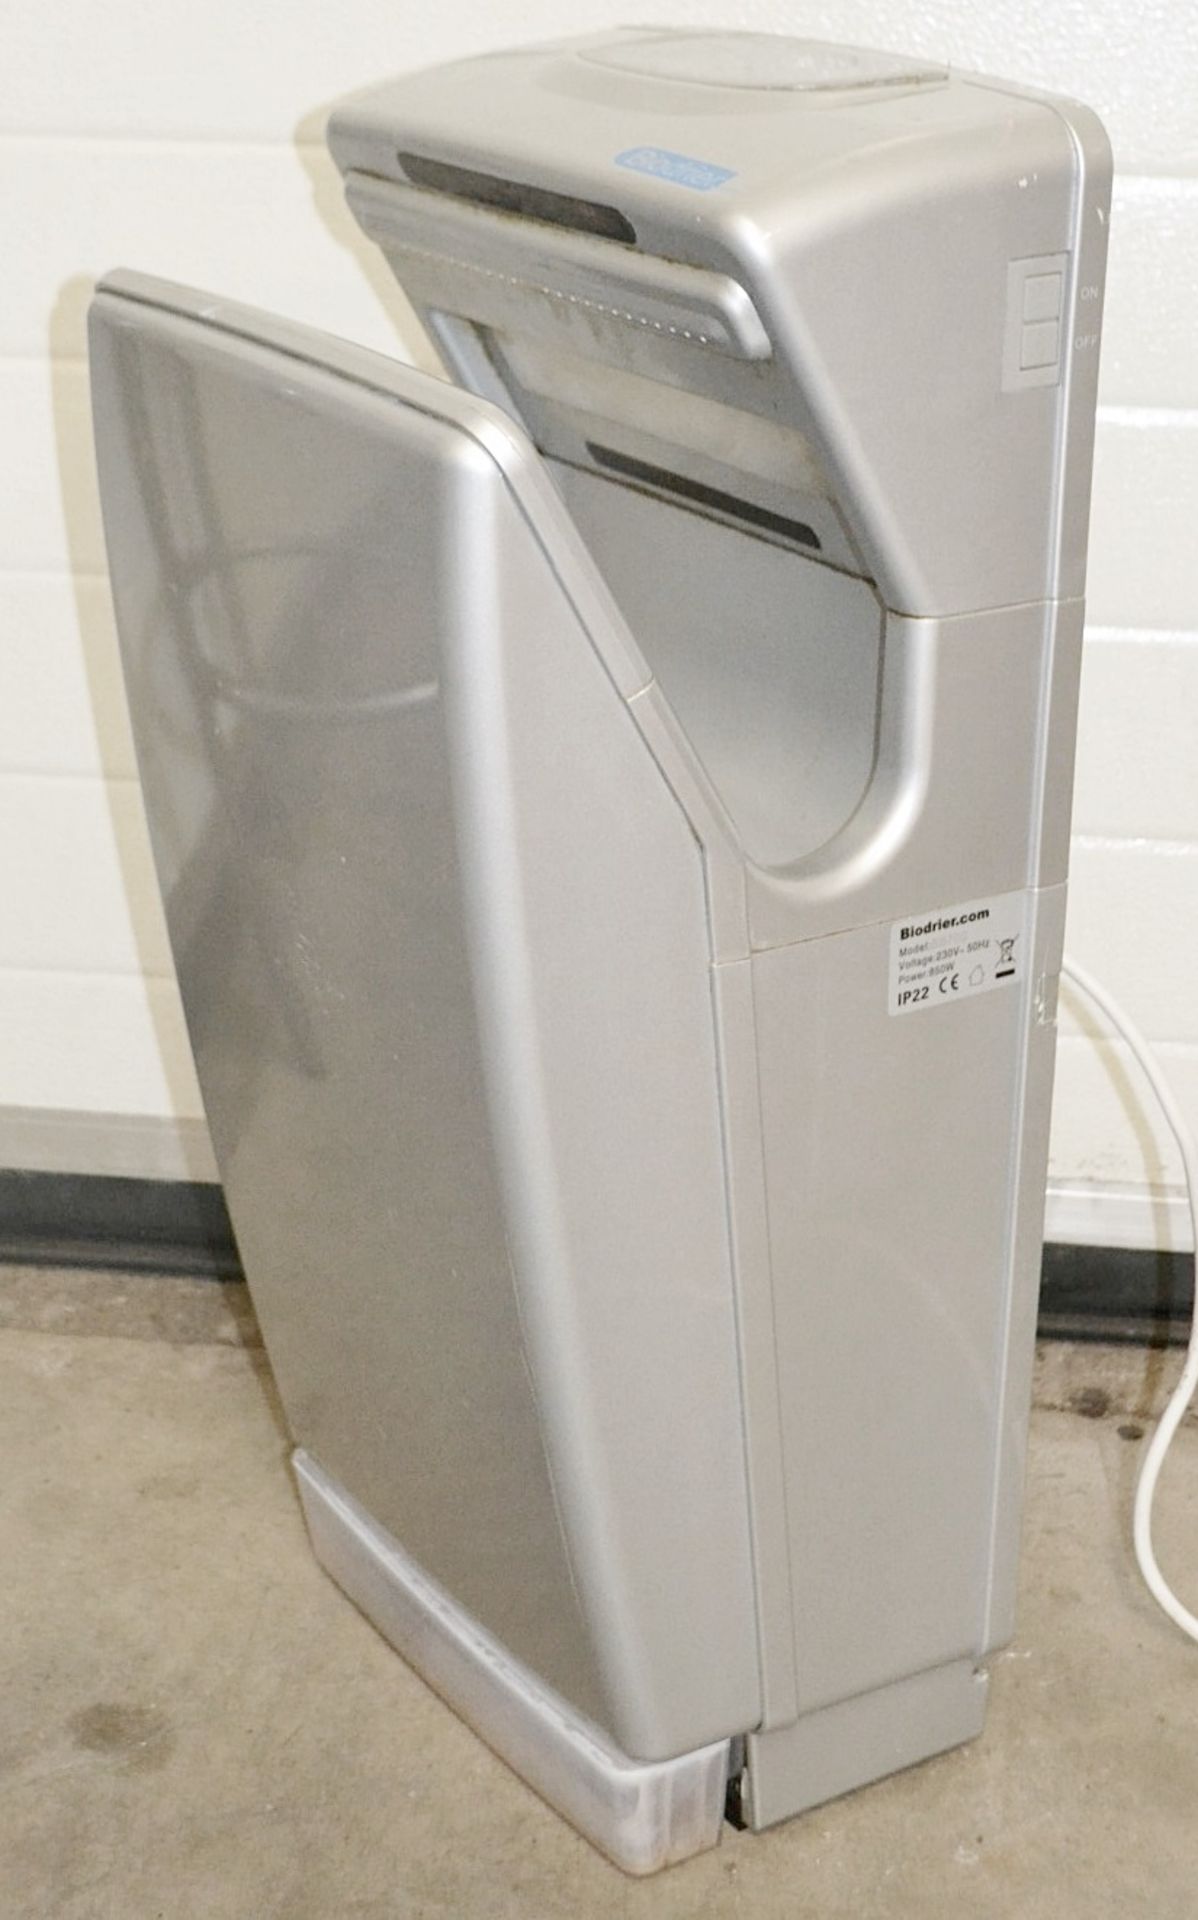 1 x BIODRIER Business Automatic Hand Dryer In Silver - Model: BB70S - Used - Image 3 of 9